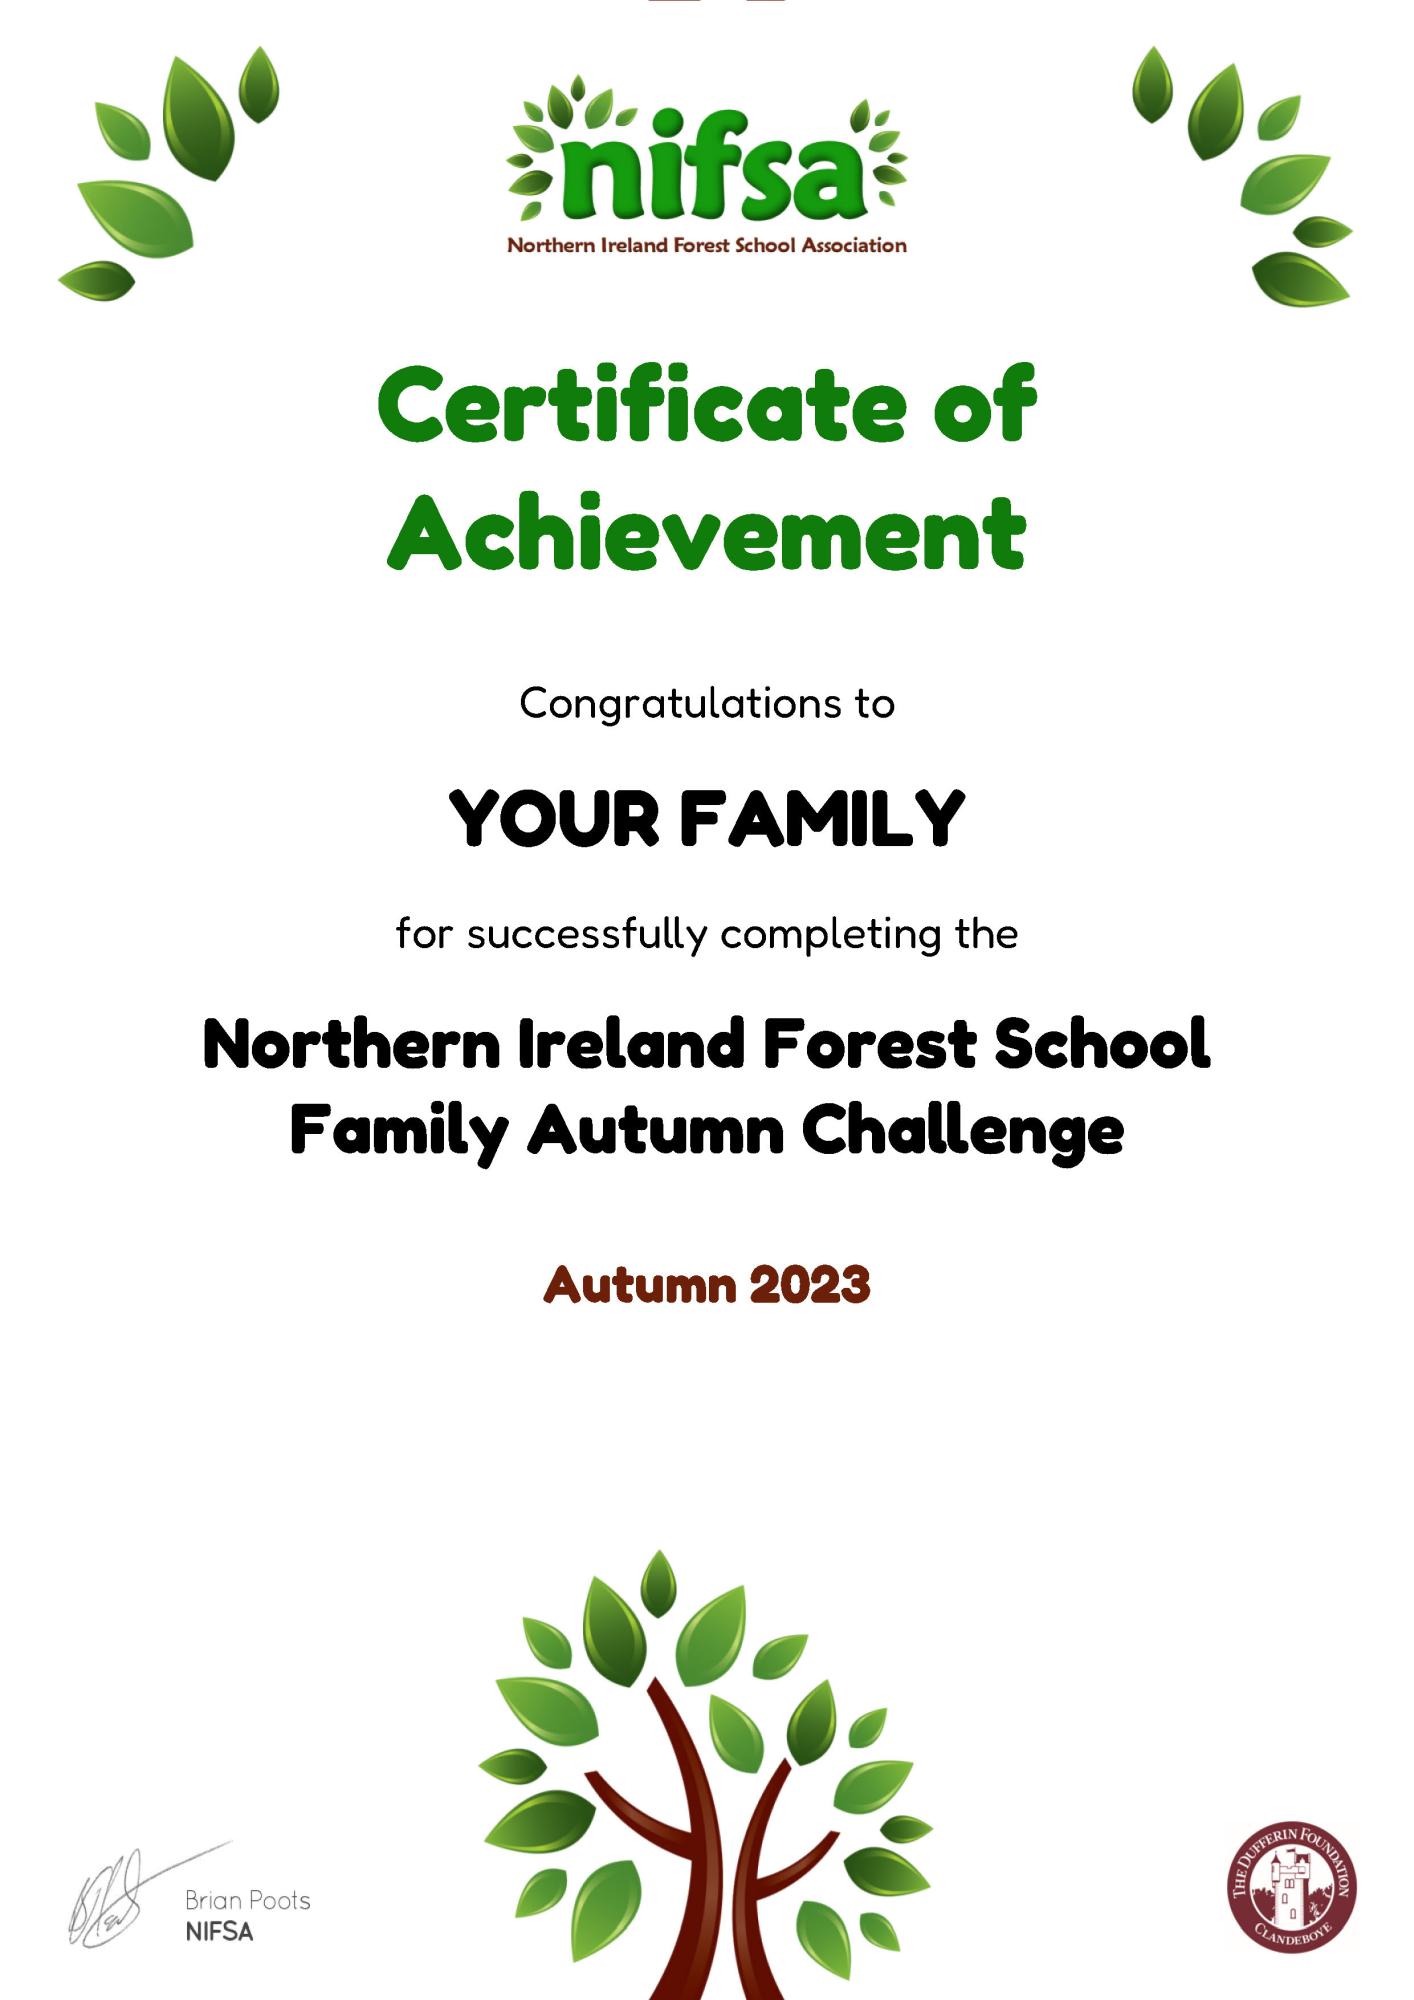 Forest School certificate for Your family